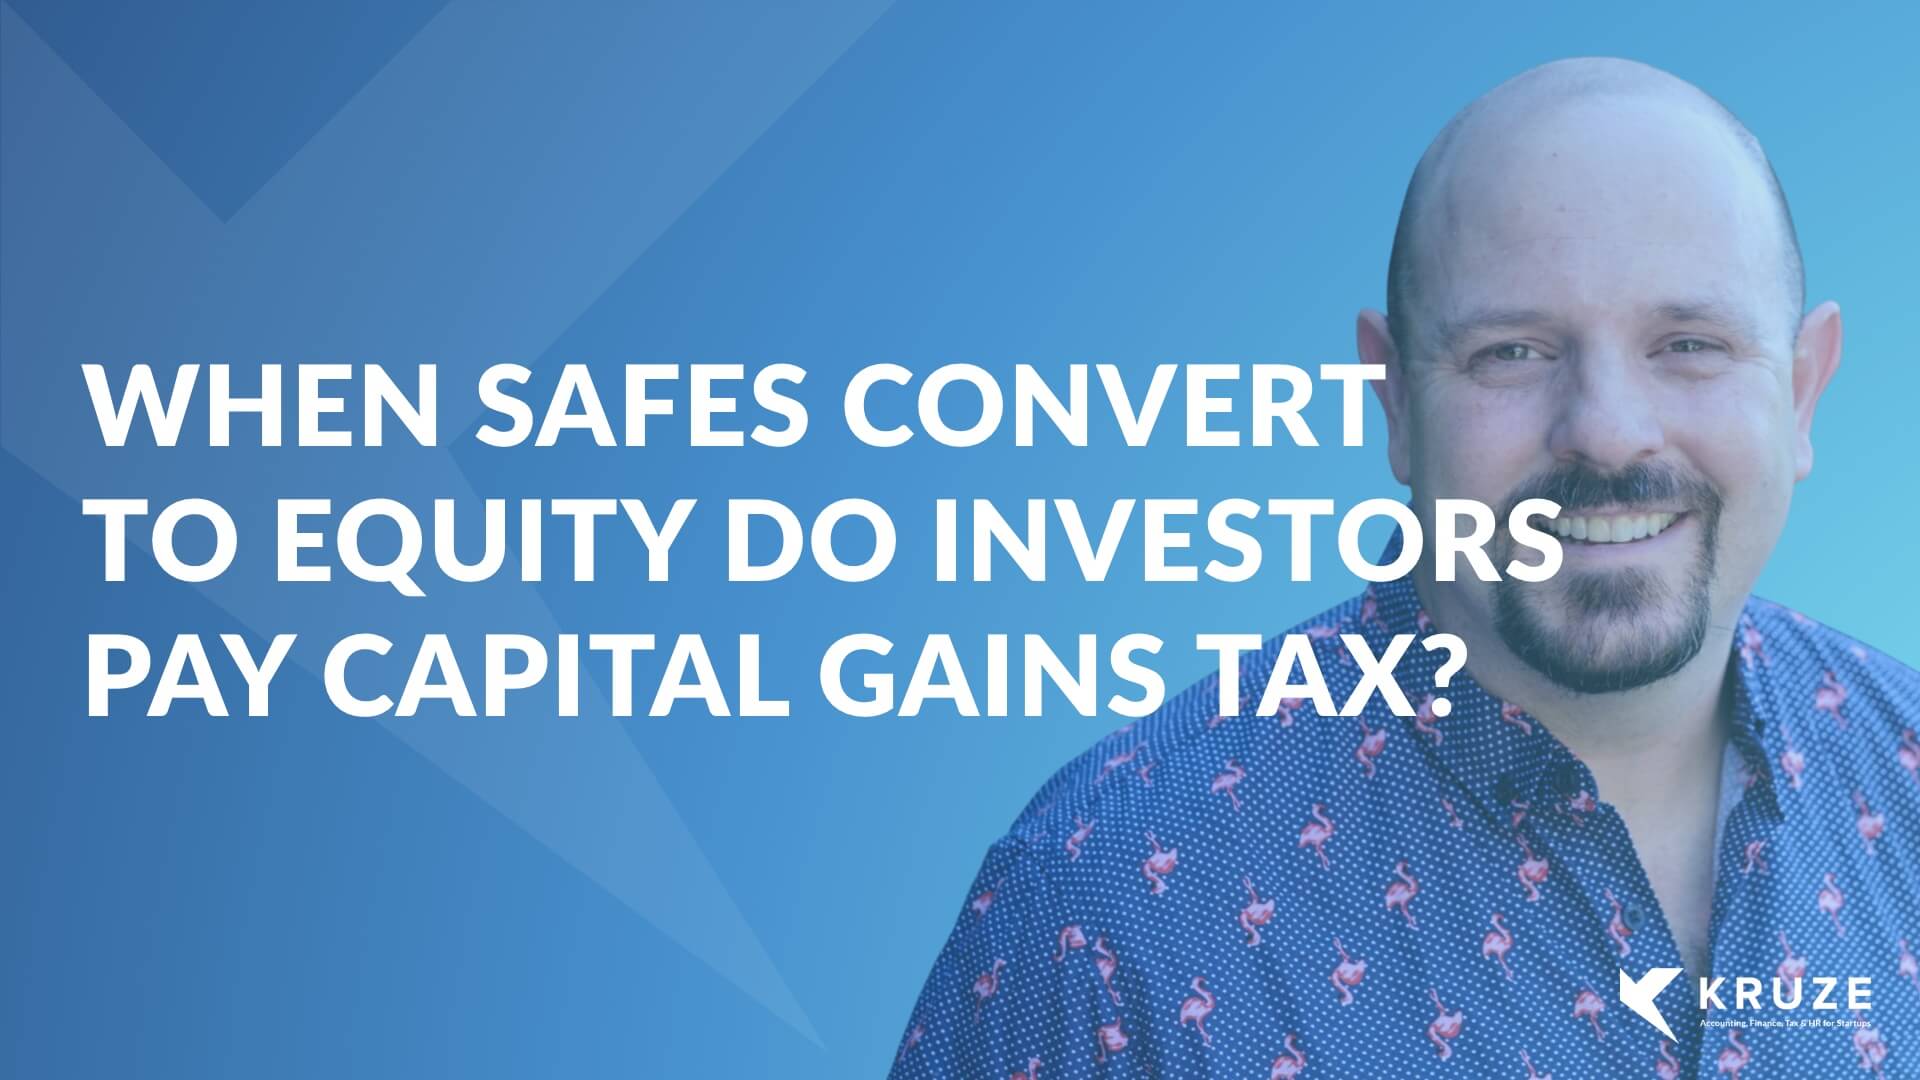 When SAFE notes convert to equity, do investors pay capital gains tax?